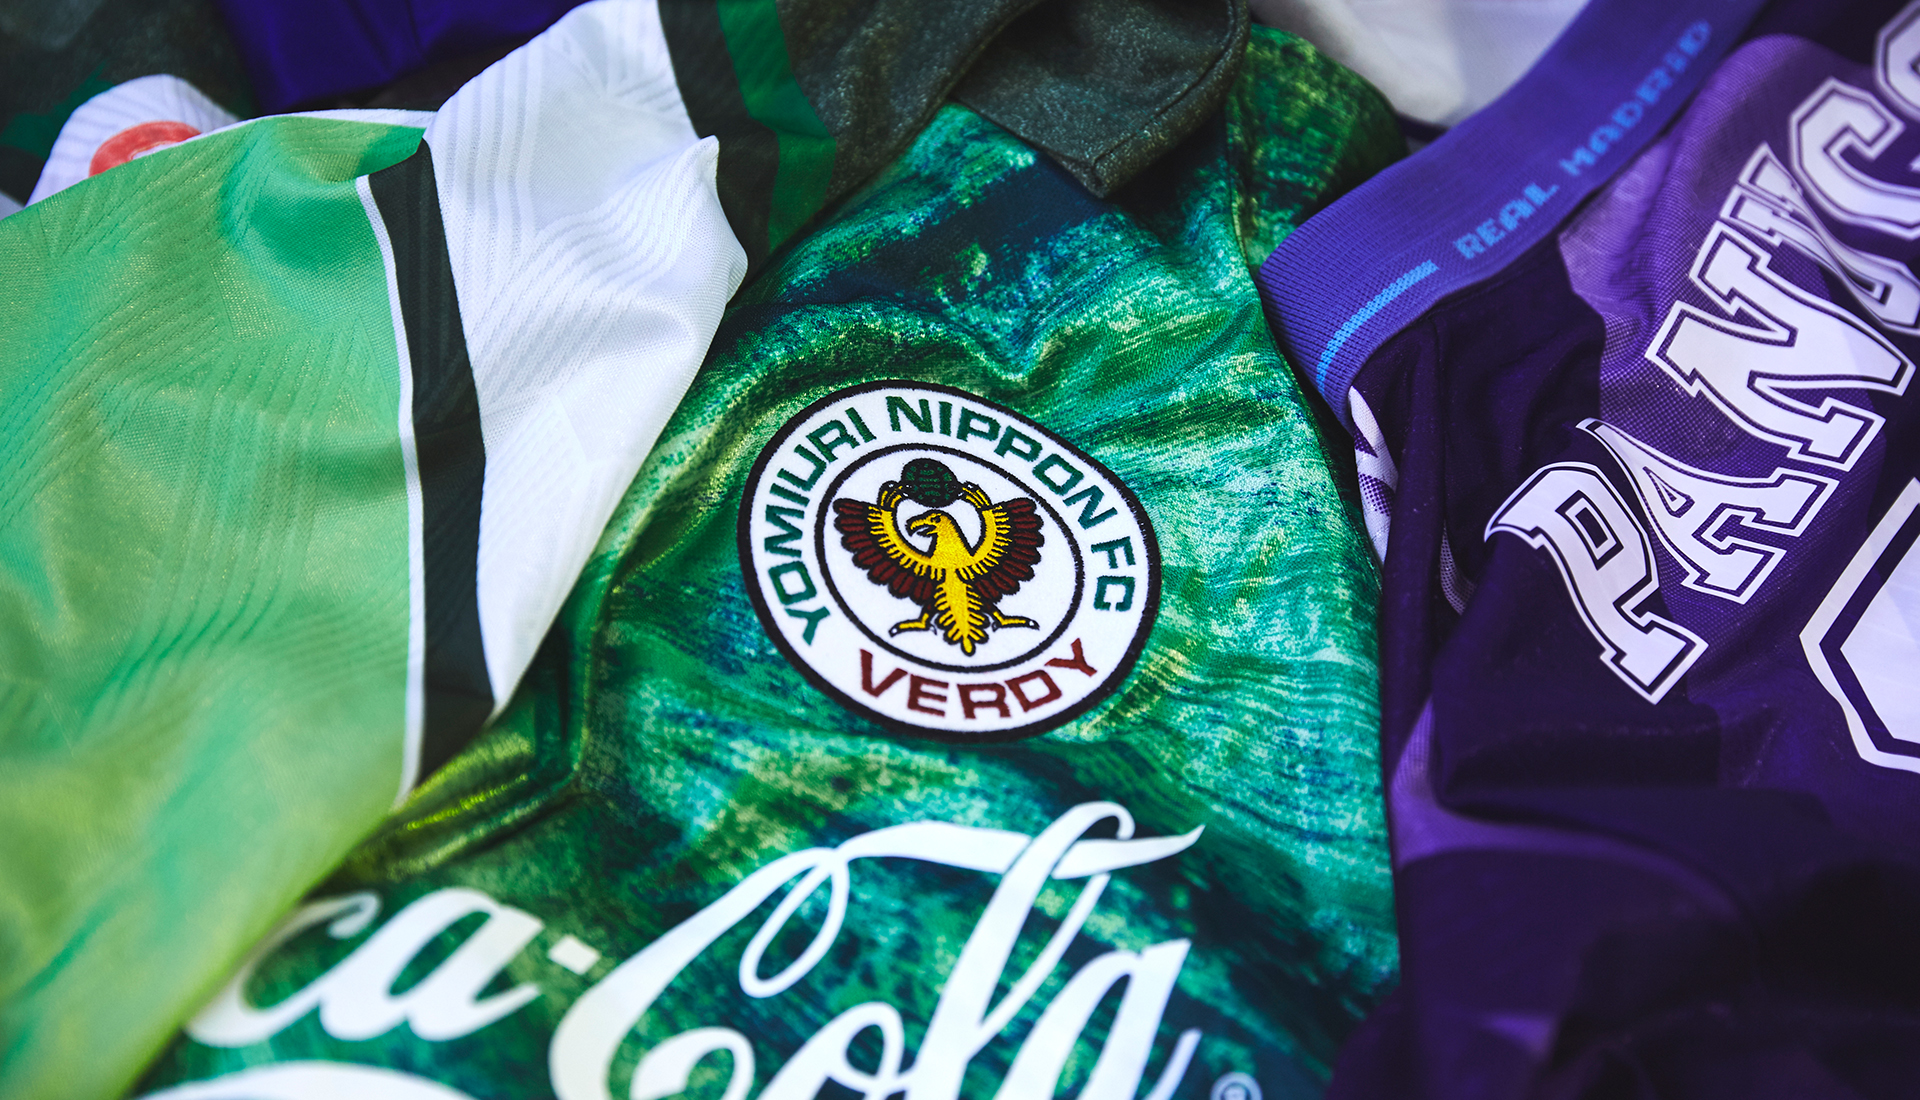 Neal Heard On Designing The Newport 19/20 Shirts - SoccerBible